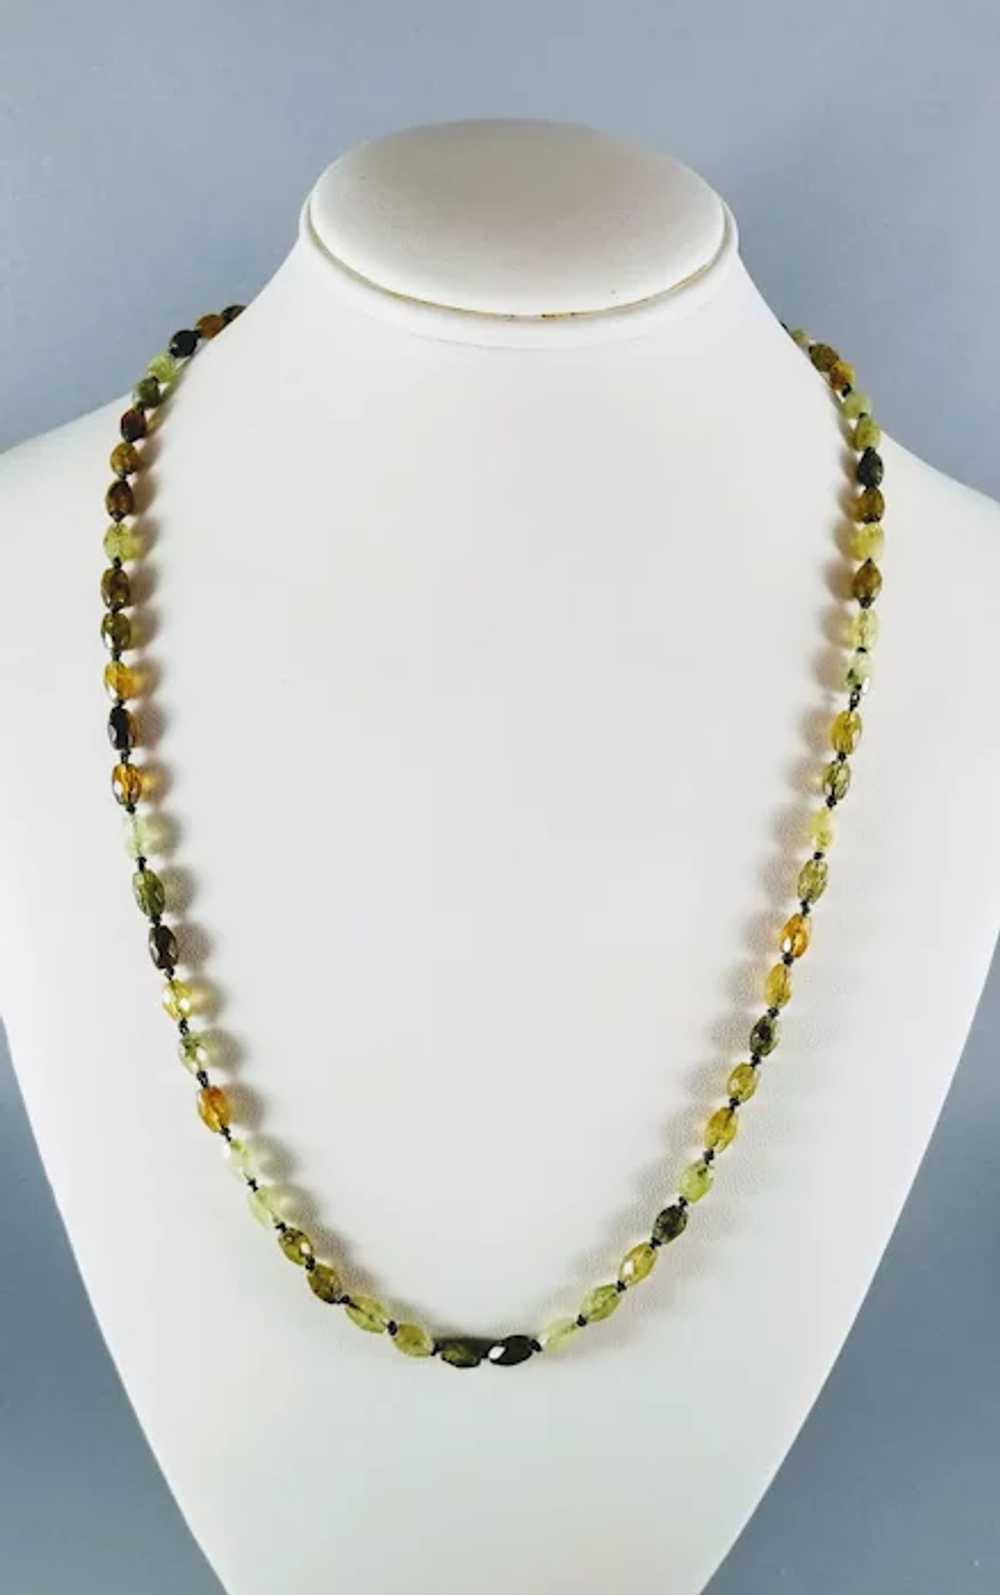 Faceted Peridot Beads Necklace - image 3